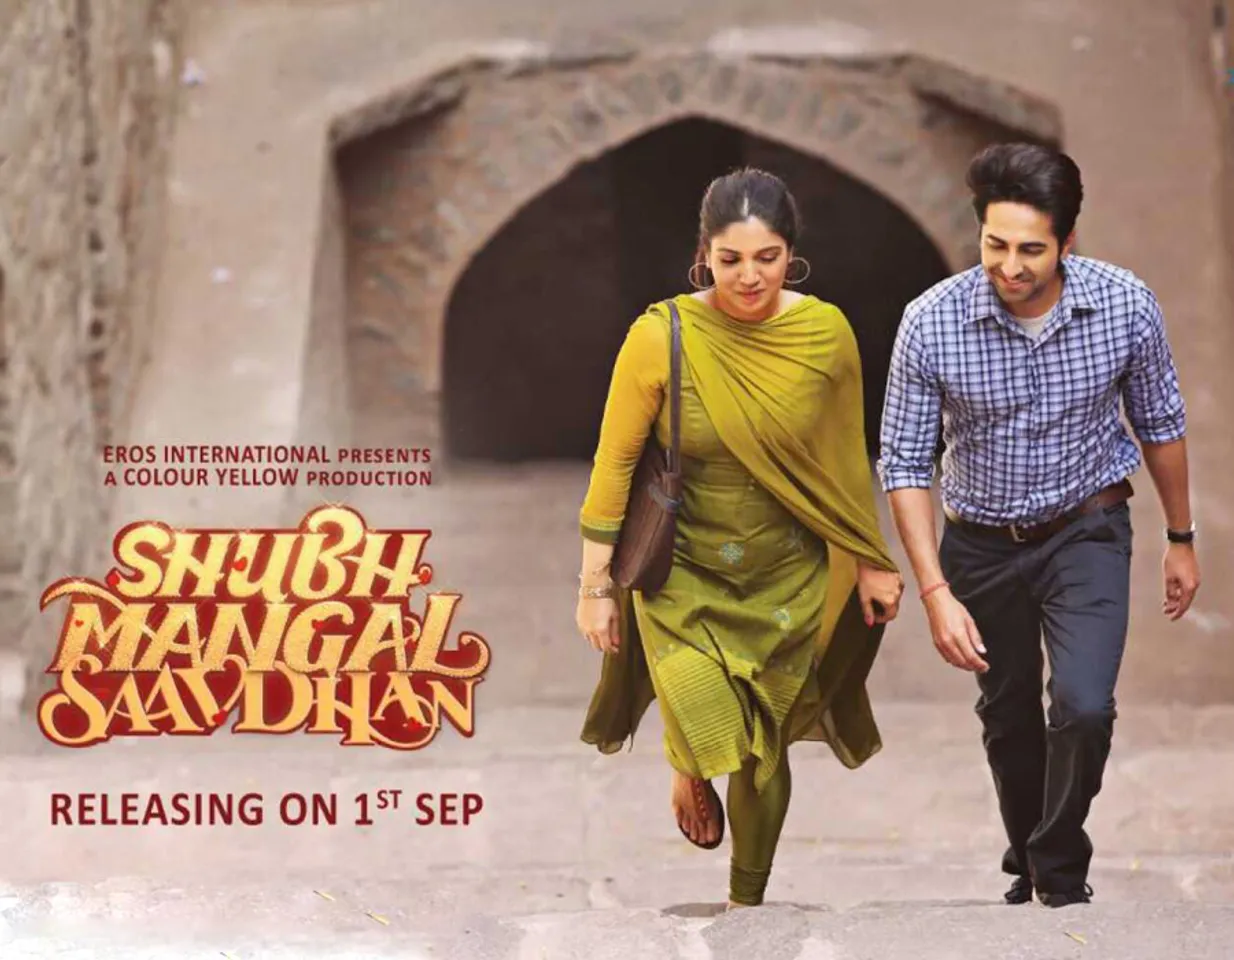 SHUBH MANGAL SAAVDHAN: A JAW-DROPPING LAUGHTER FEST YOU WOULDN'T WANT TO MISS